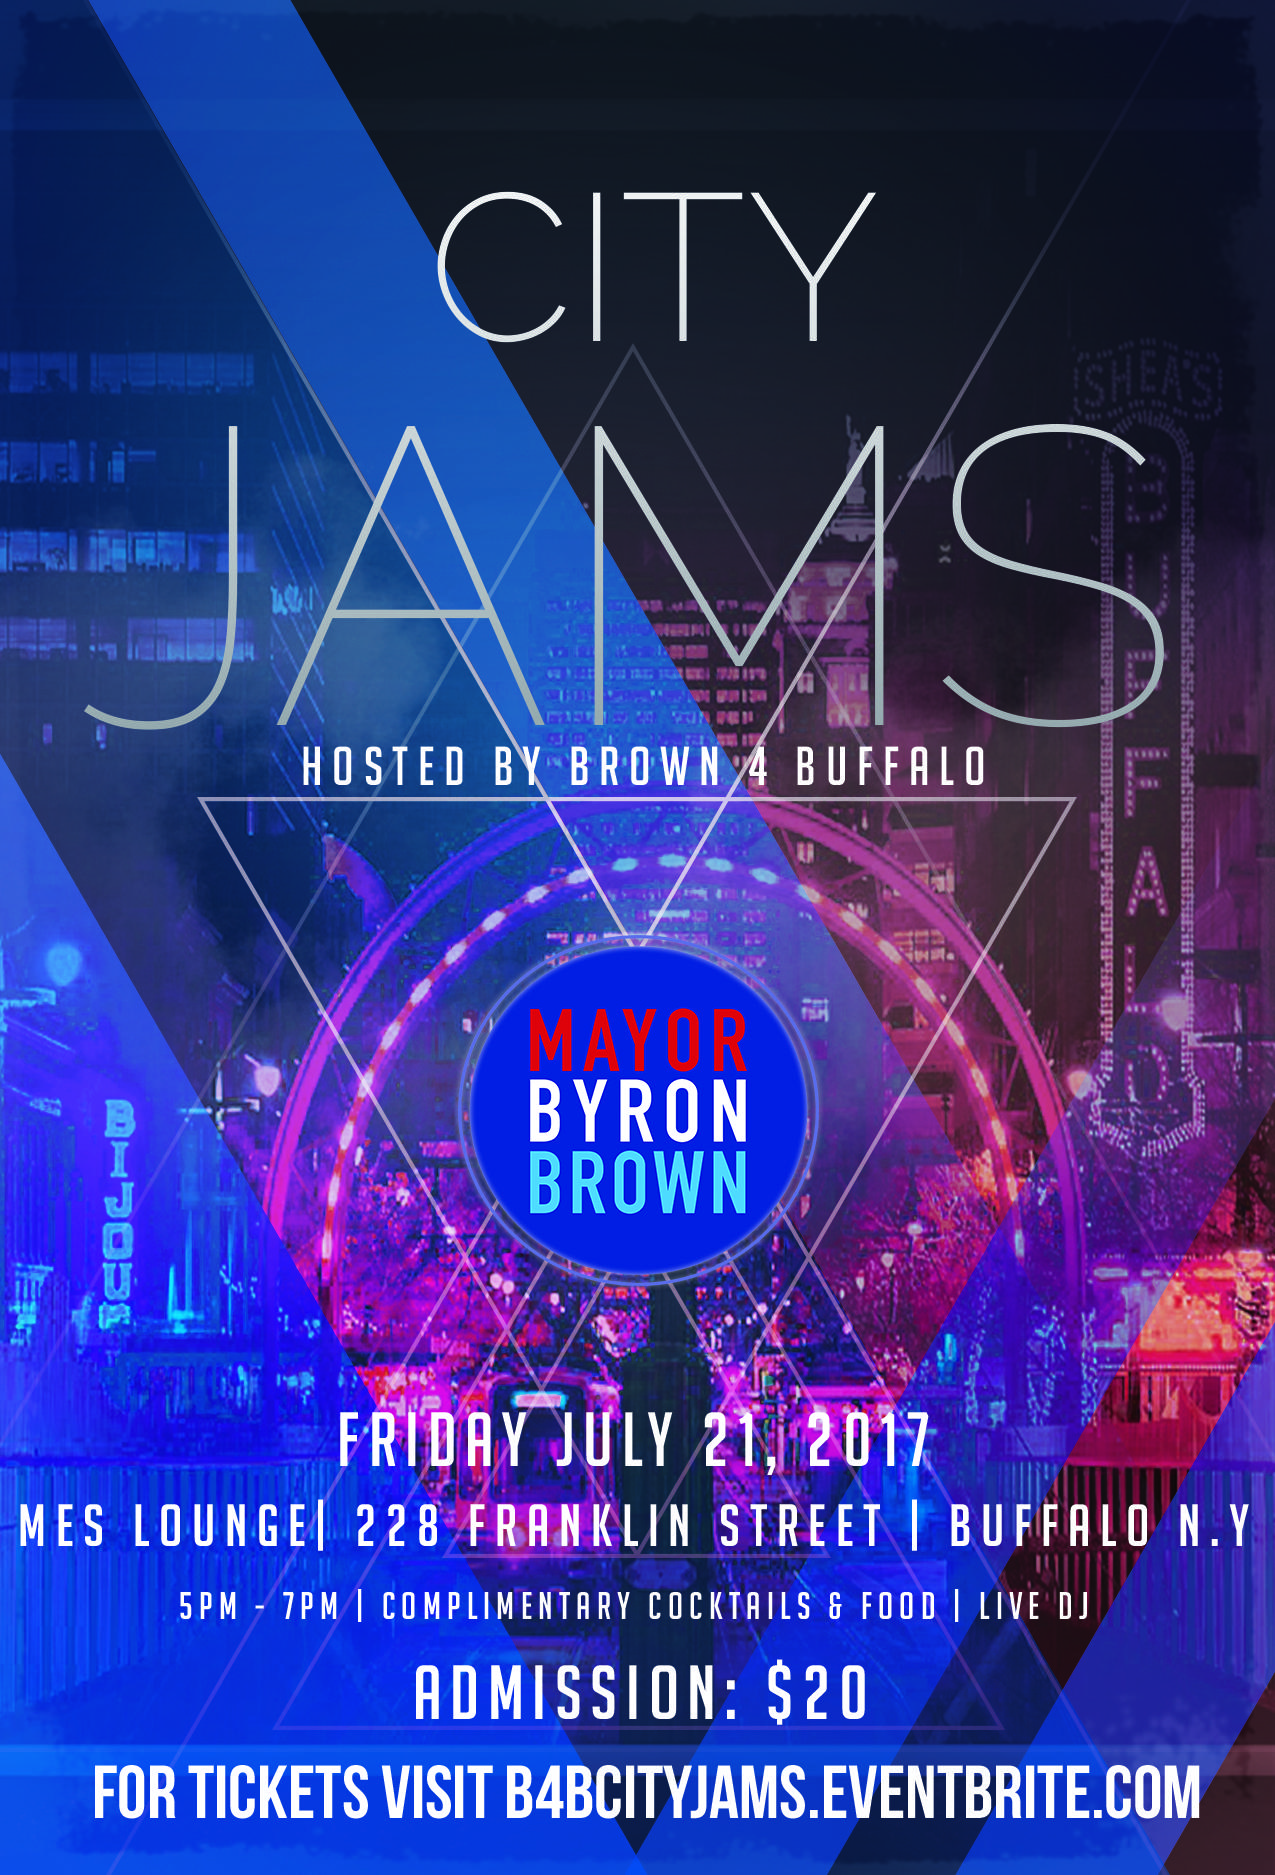 City Jams Hosted by Brown 4 Buffalo